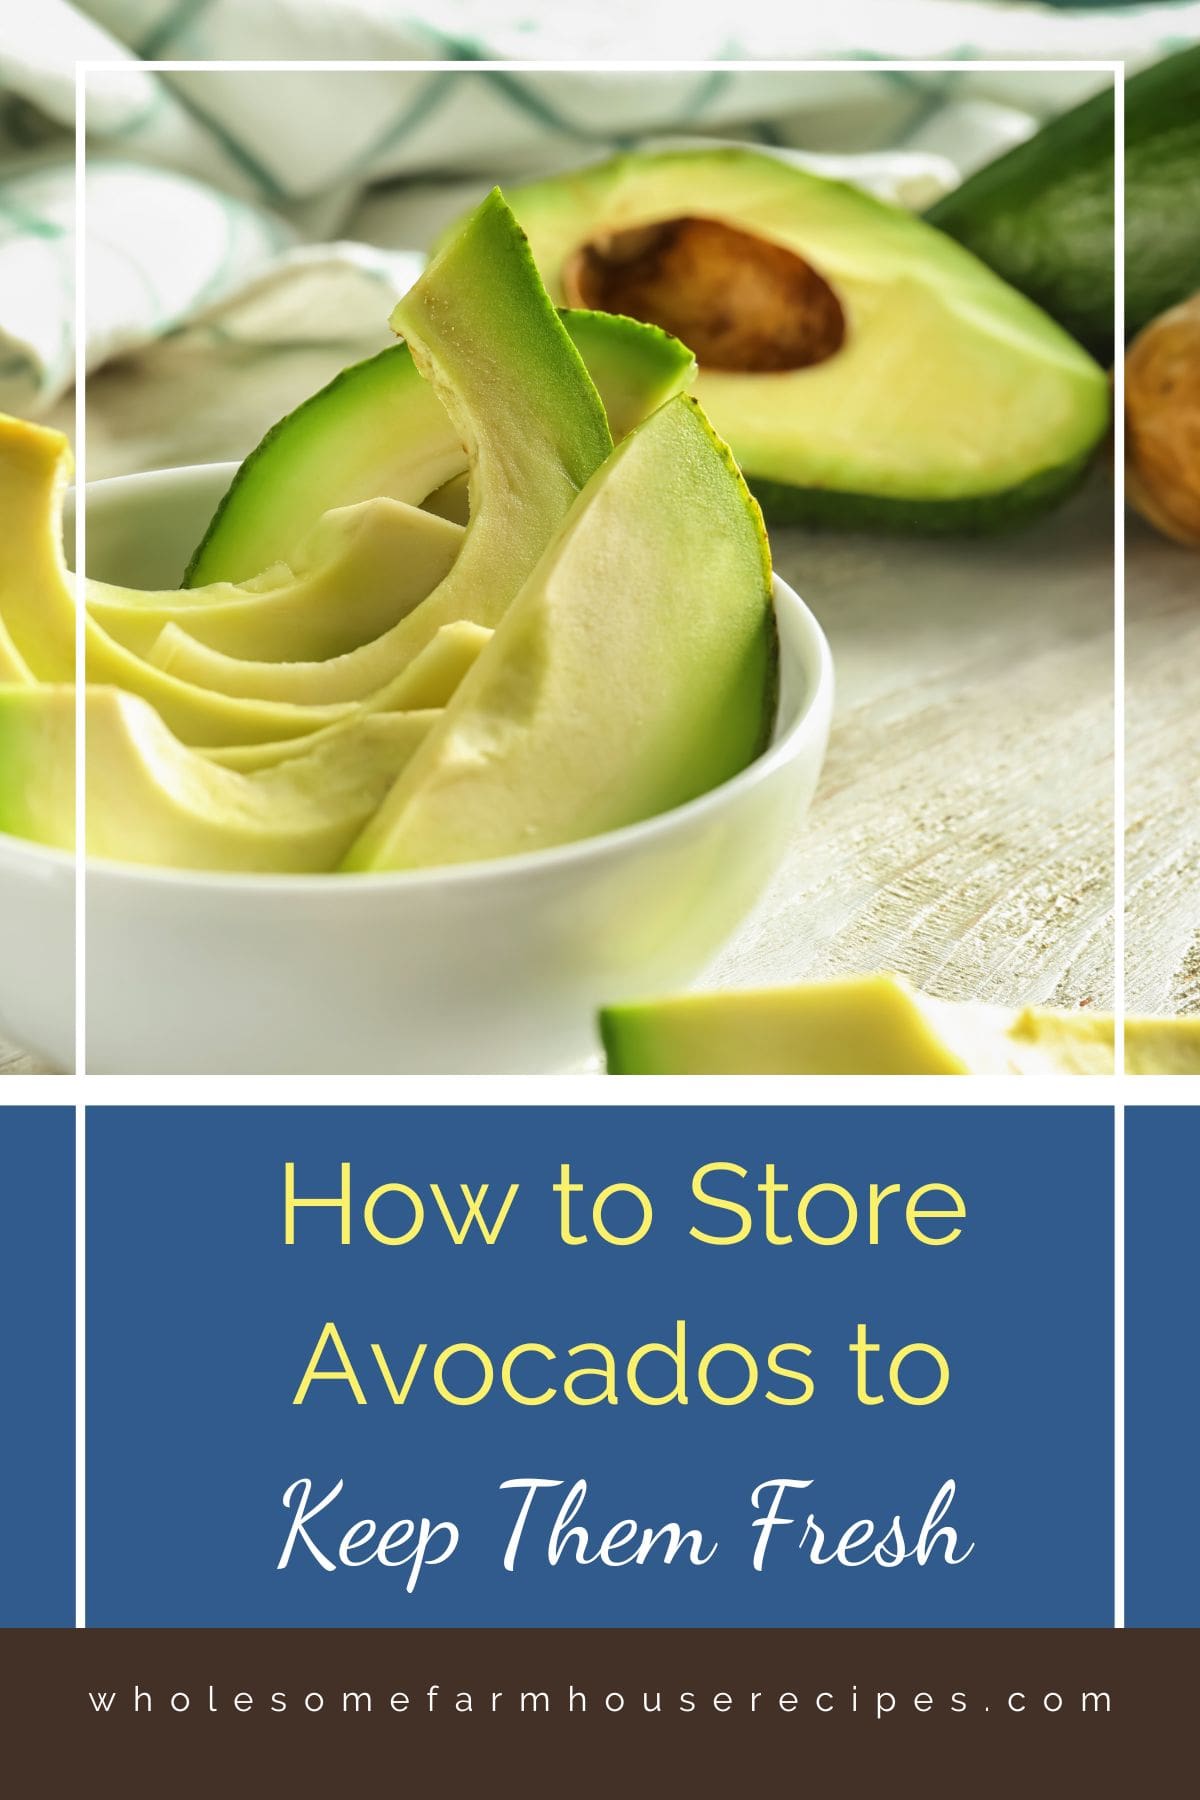 How to Store Avocados to Keep Them Fresh